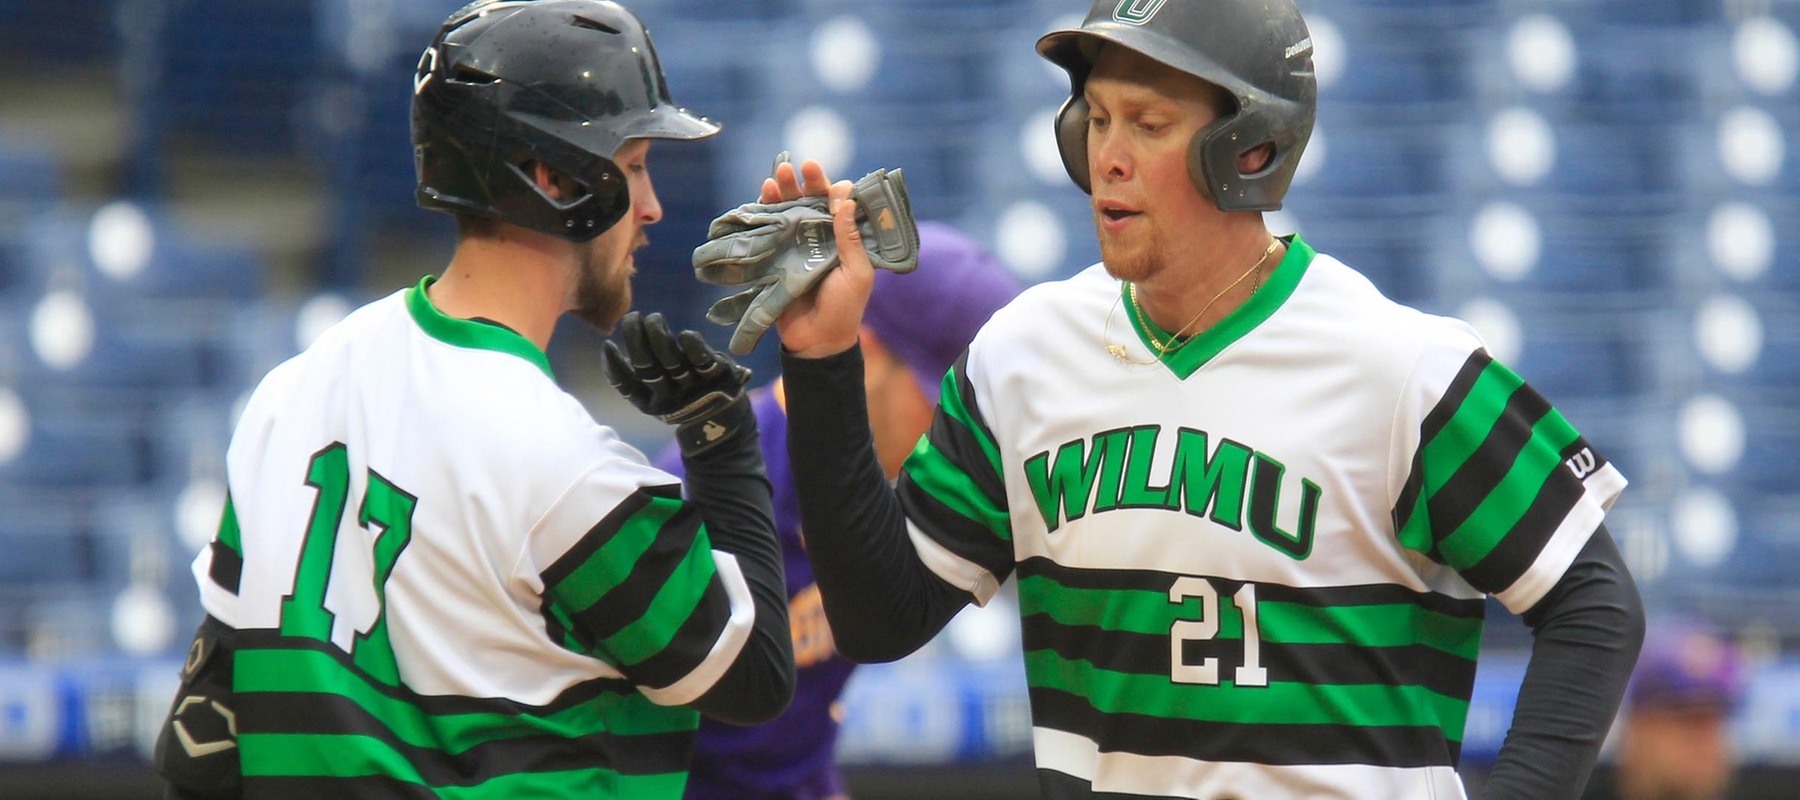 Copyright 2022; Wilmington University. All rights reserved. Photo by Tim Shaffer. April 19, 2022 vs. West Chester at Citizens Bank Park.